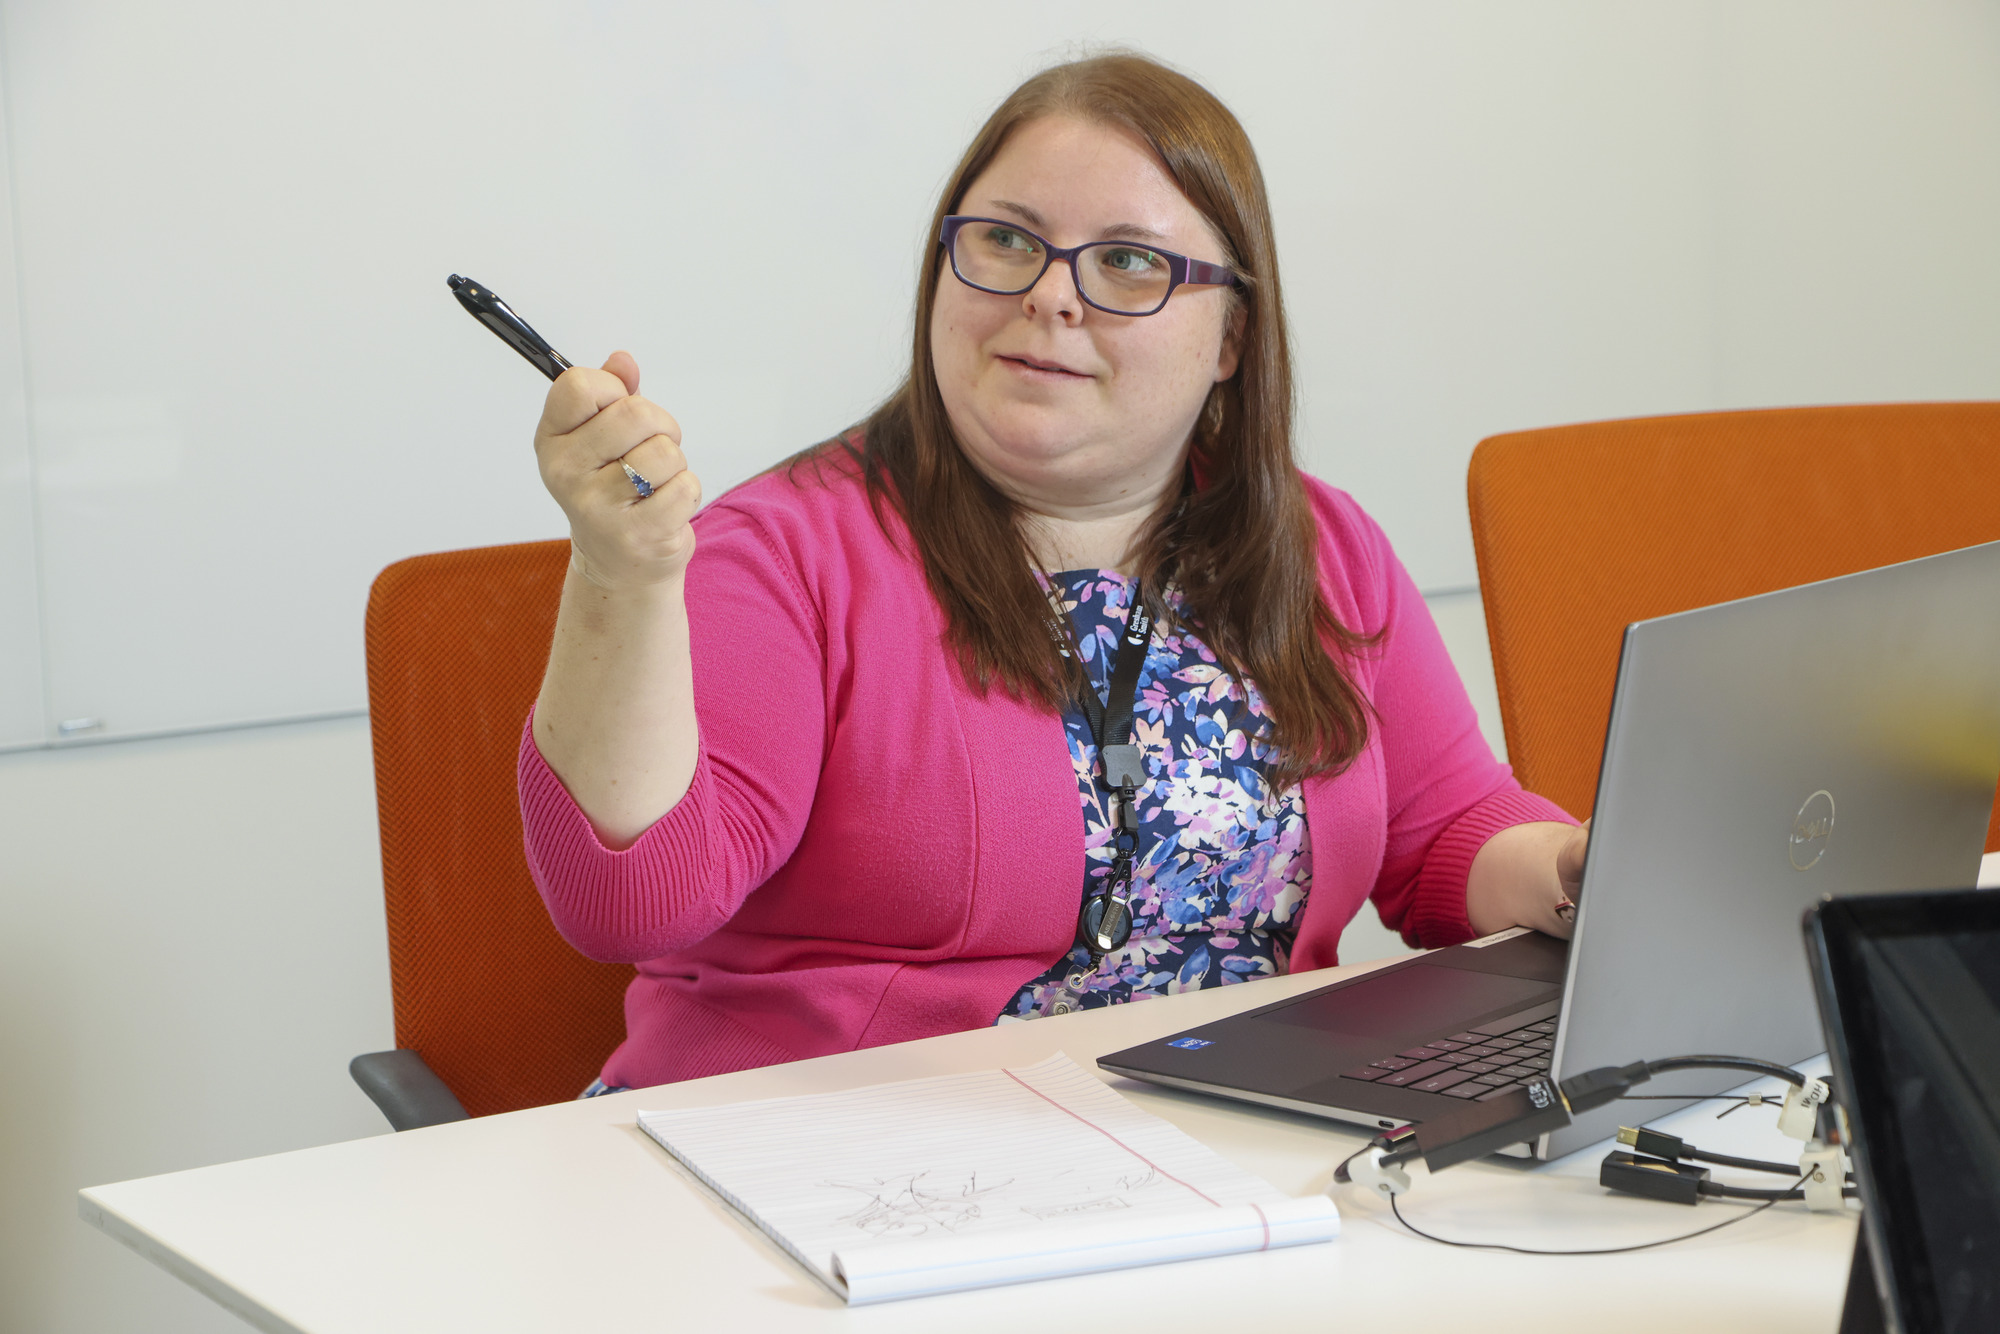 A person sitting at a table working on a laptop holding a pen and pointing at something